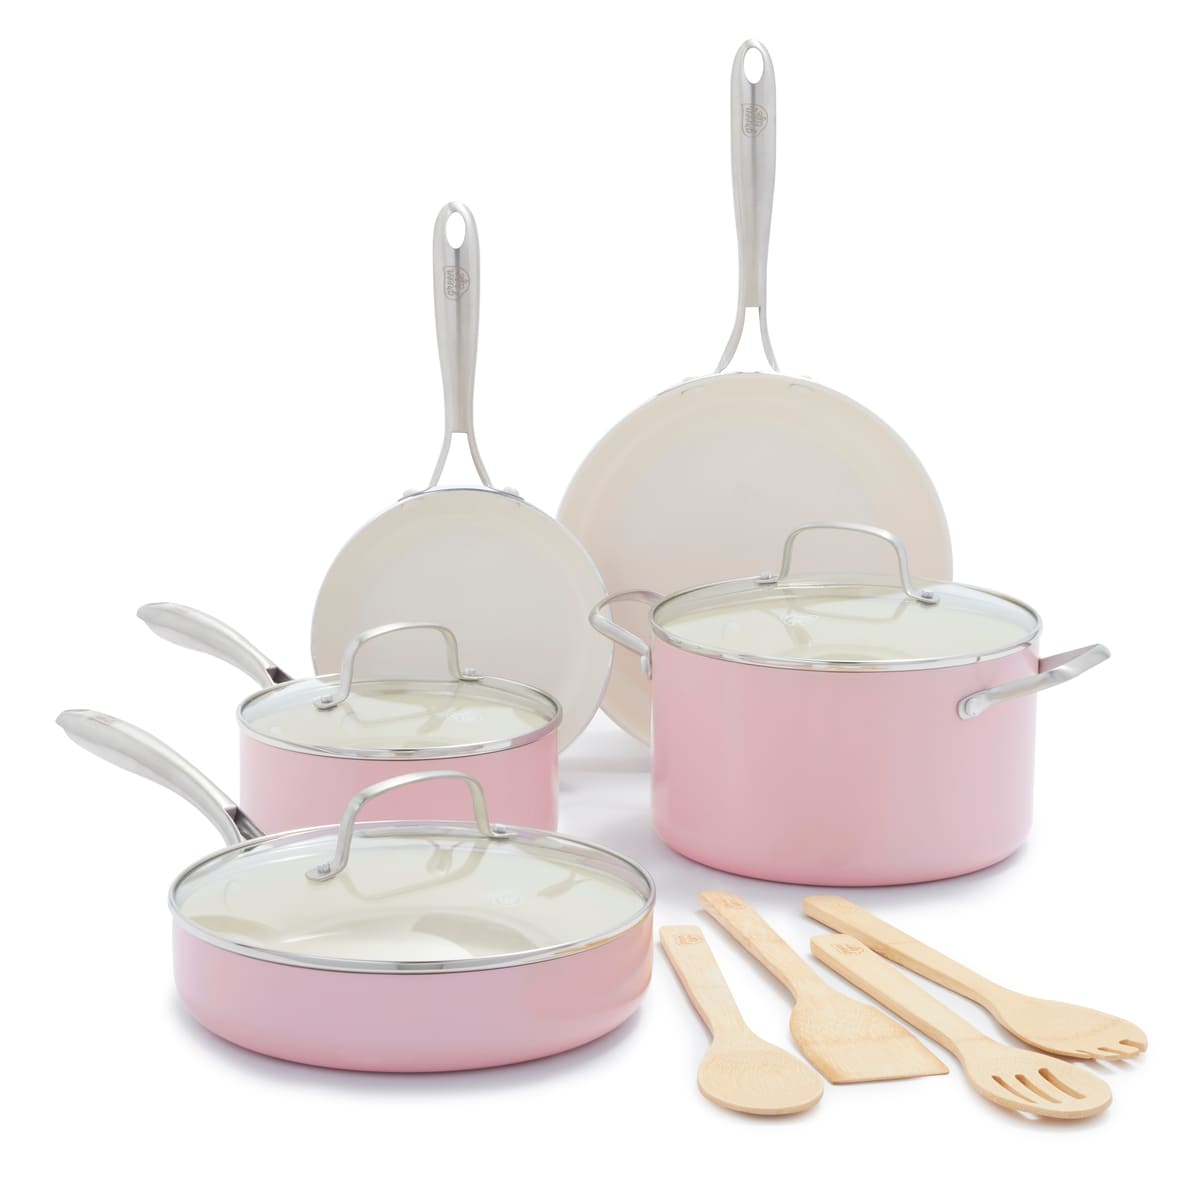 CC004711-001 - Porpoise GREENLIFE ARTISAN 12PC COOKWARE SETS, PINK - Product Image 1